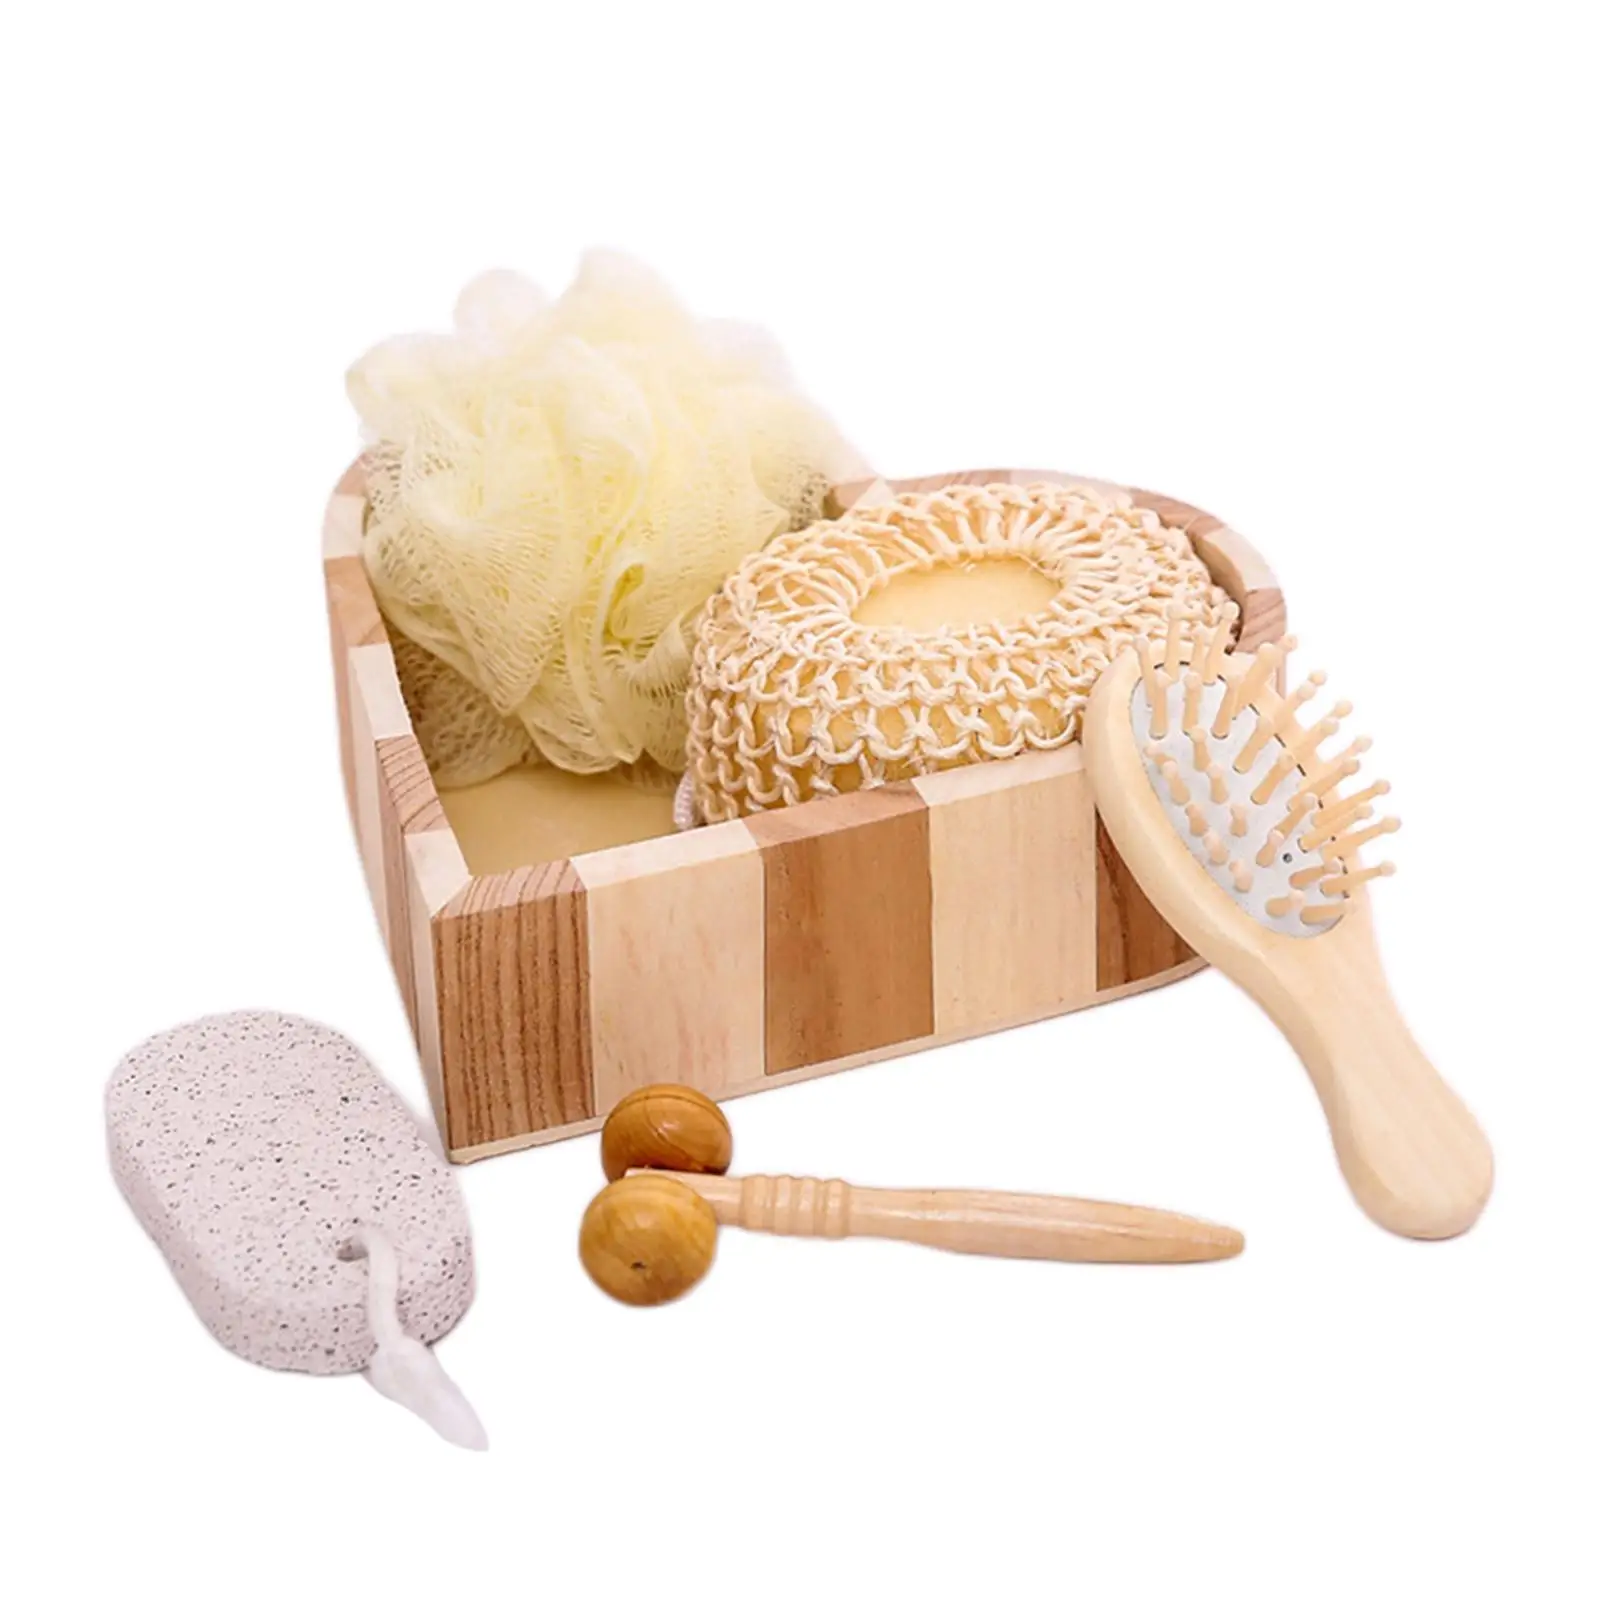 5 Pieces Bath Accessories Set Pumice Stone Hair Brush Sponge Ball in Heart Wooden Box for Body and Foot SPA Women Man Gift